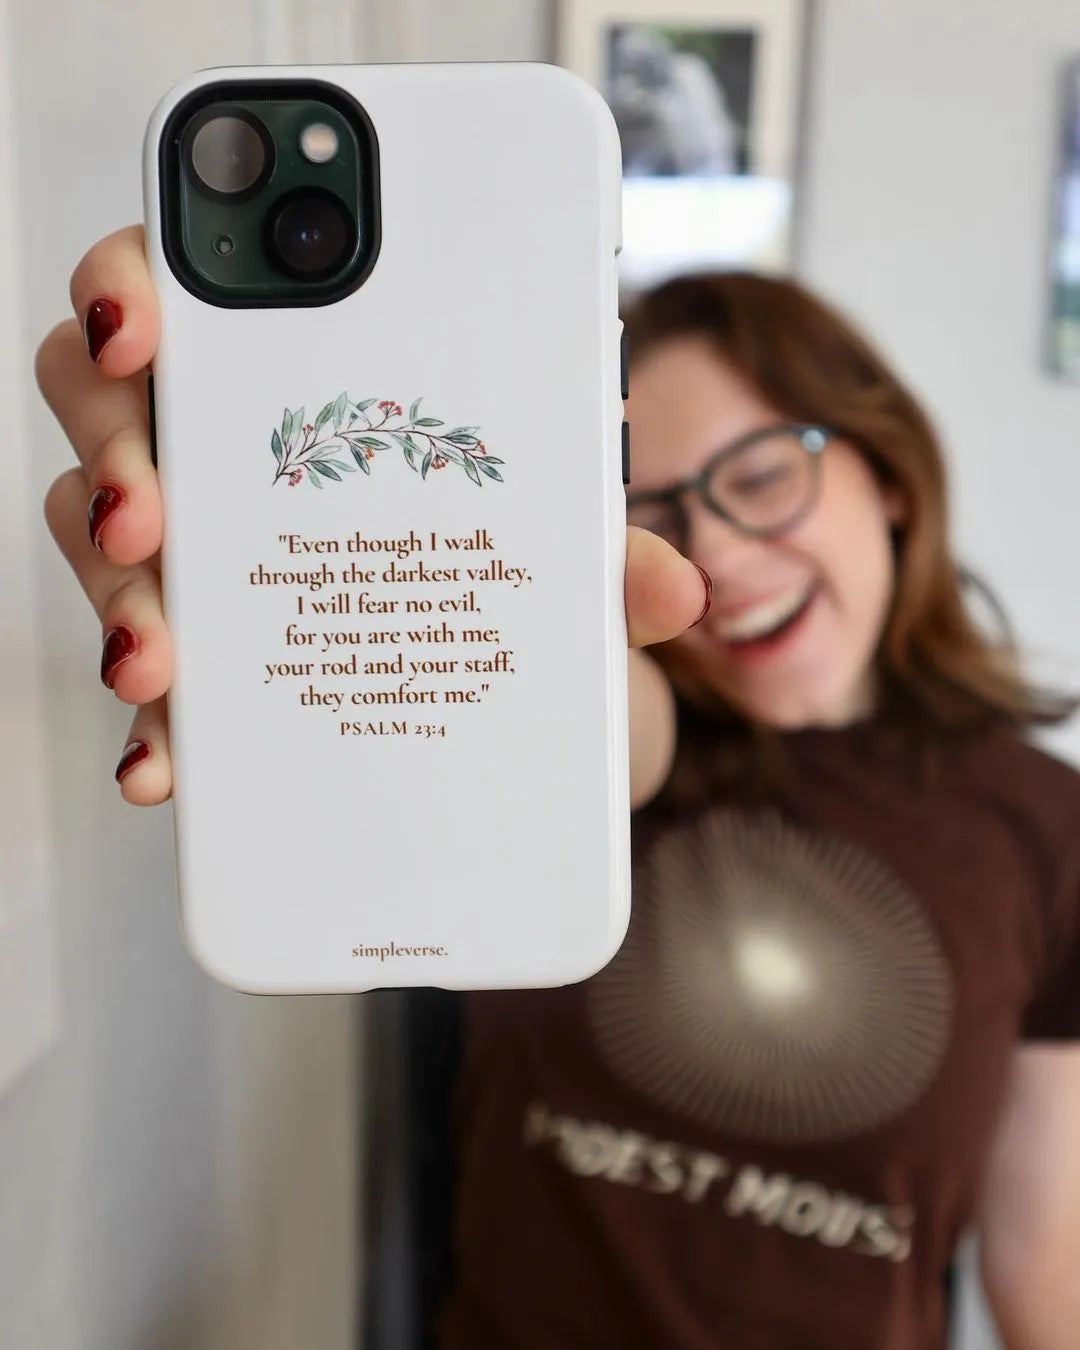 Model presenting a Christian-themed iPhone case to the camera, featuring an inspirational Bible verse, perfect for expressing faith through Simpleverse accessories.